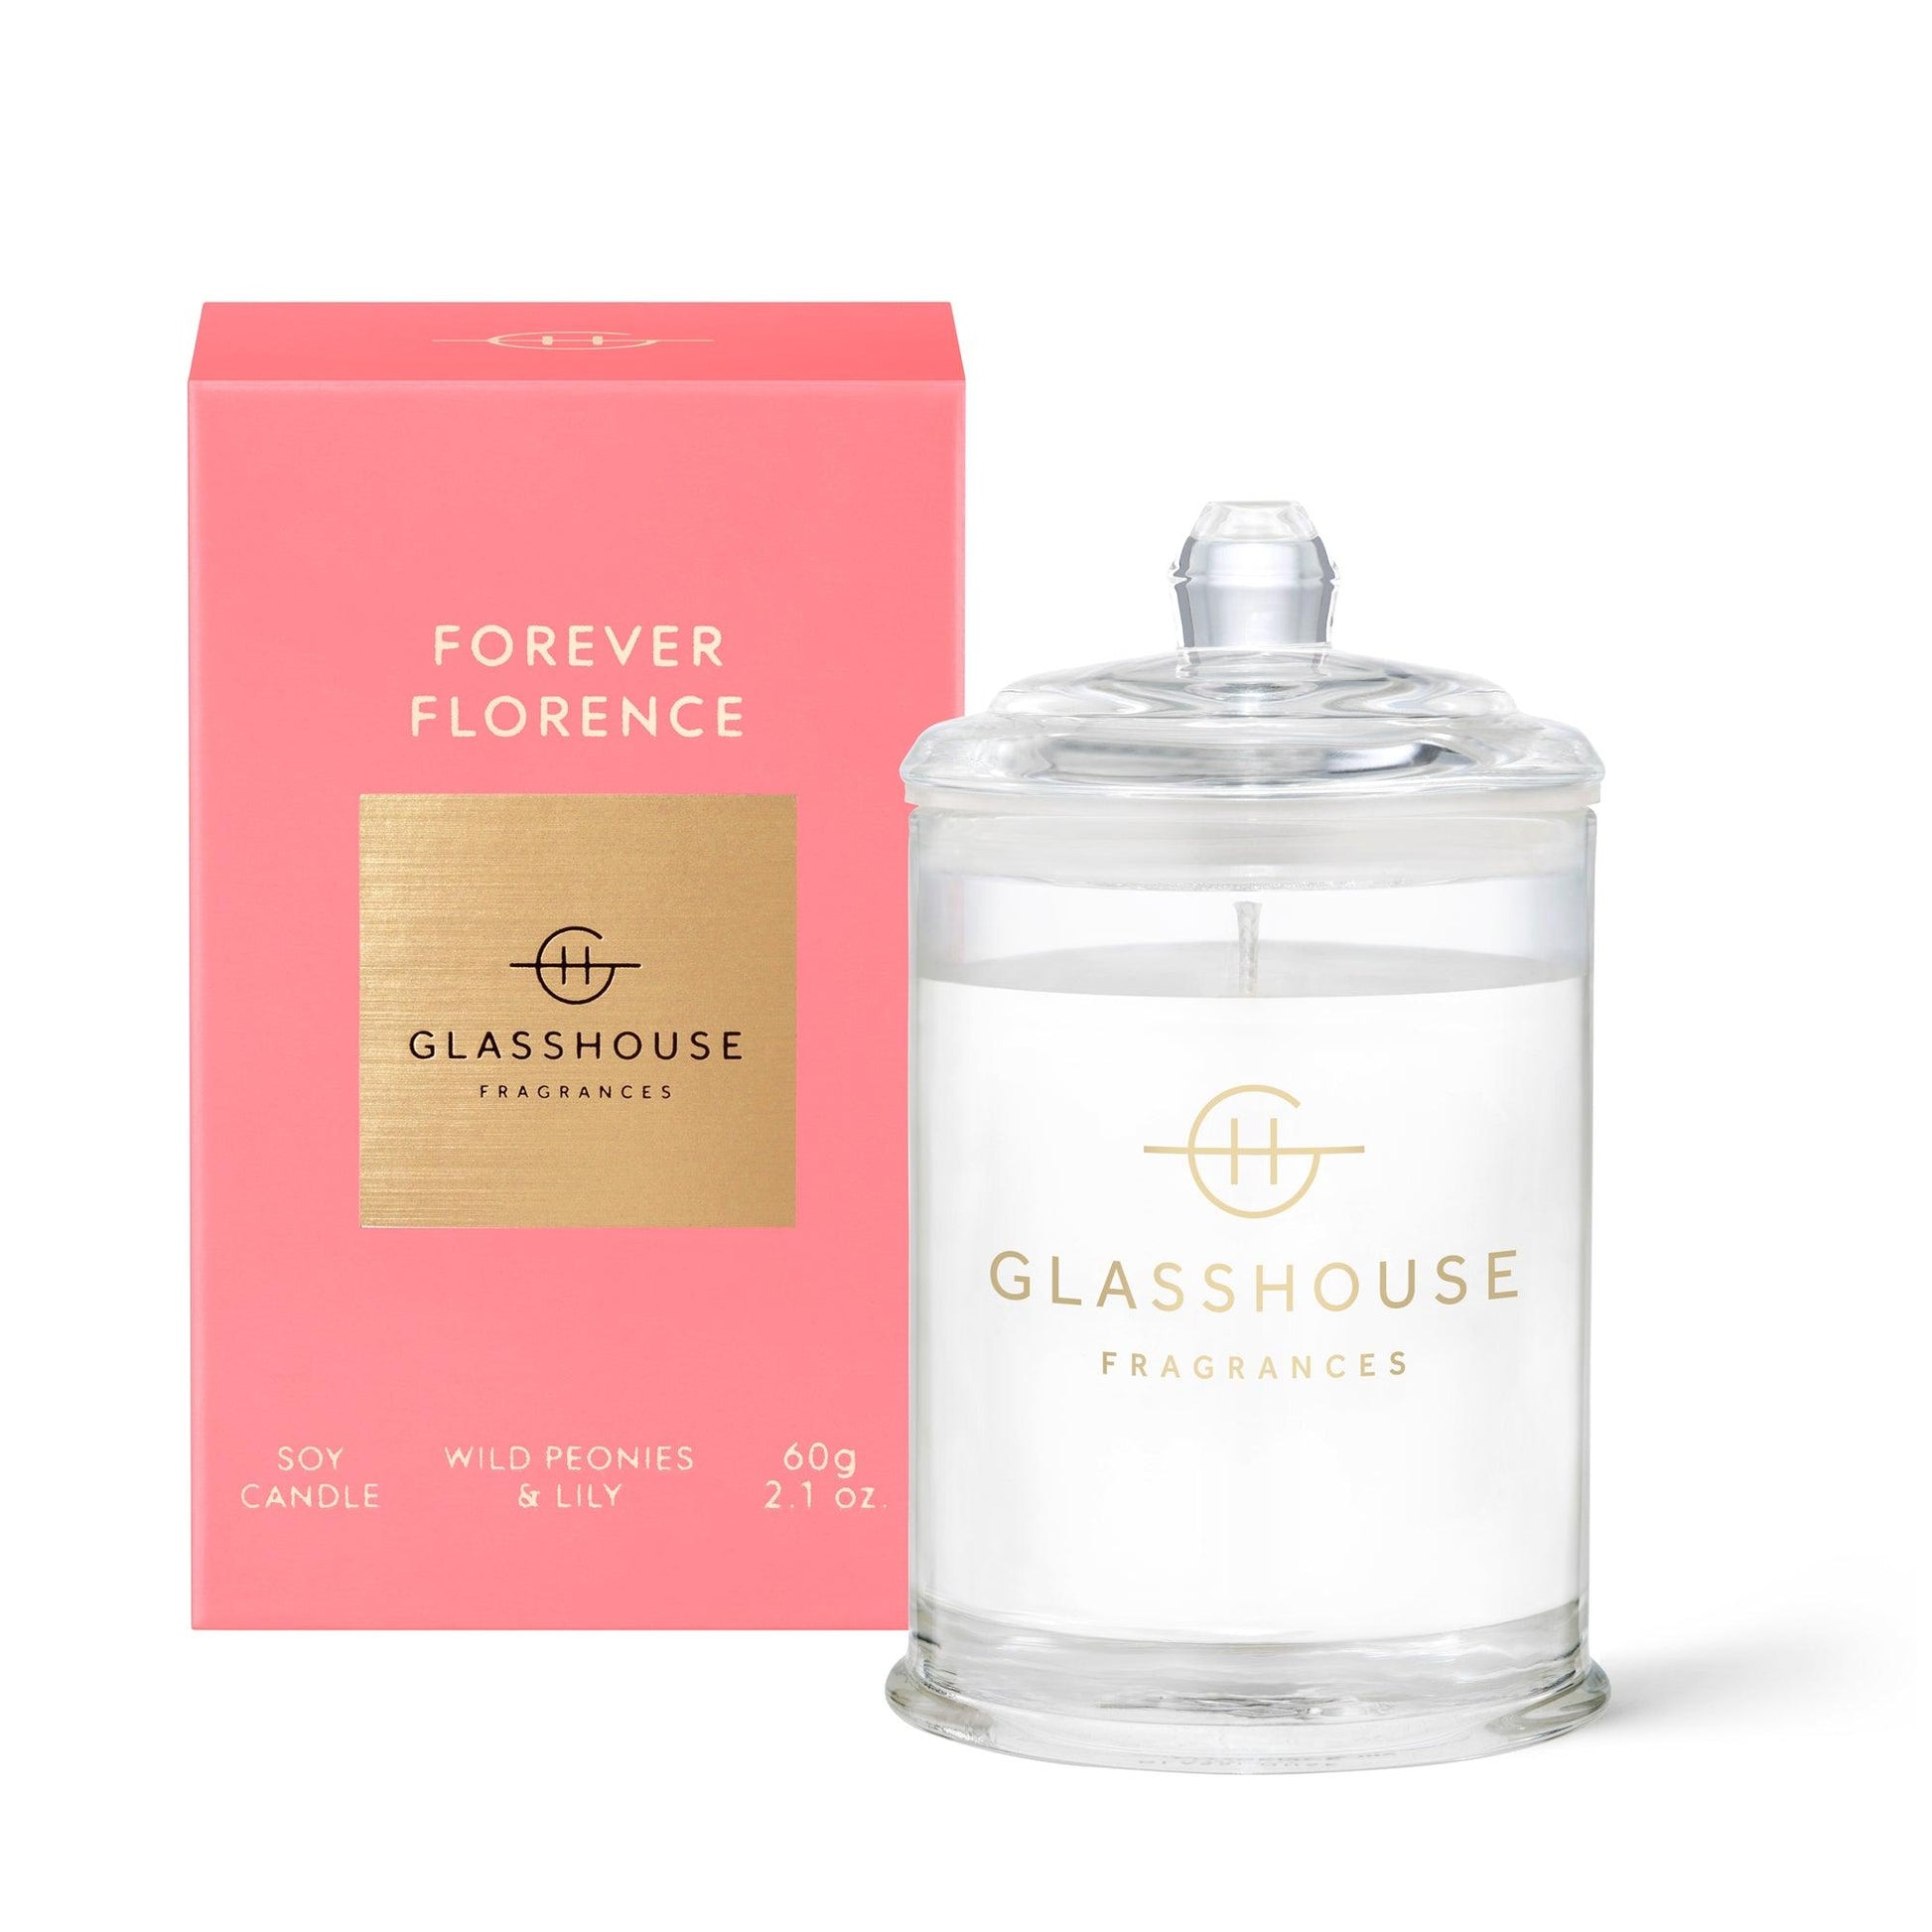 GF 60g FOREVER FLORENCE Candle - Handworks Nouveau Paperie